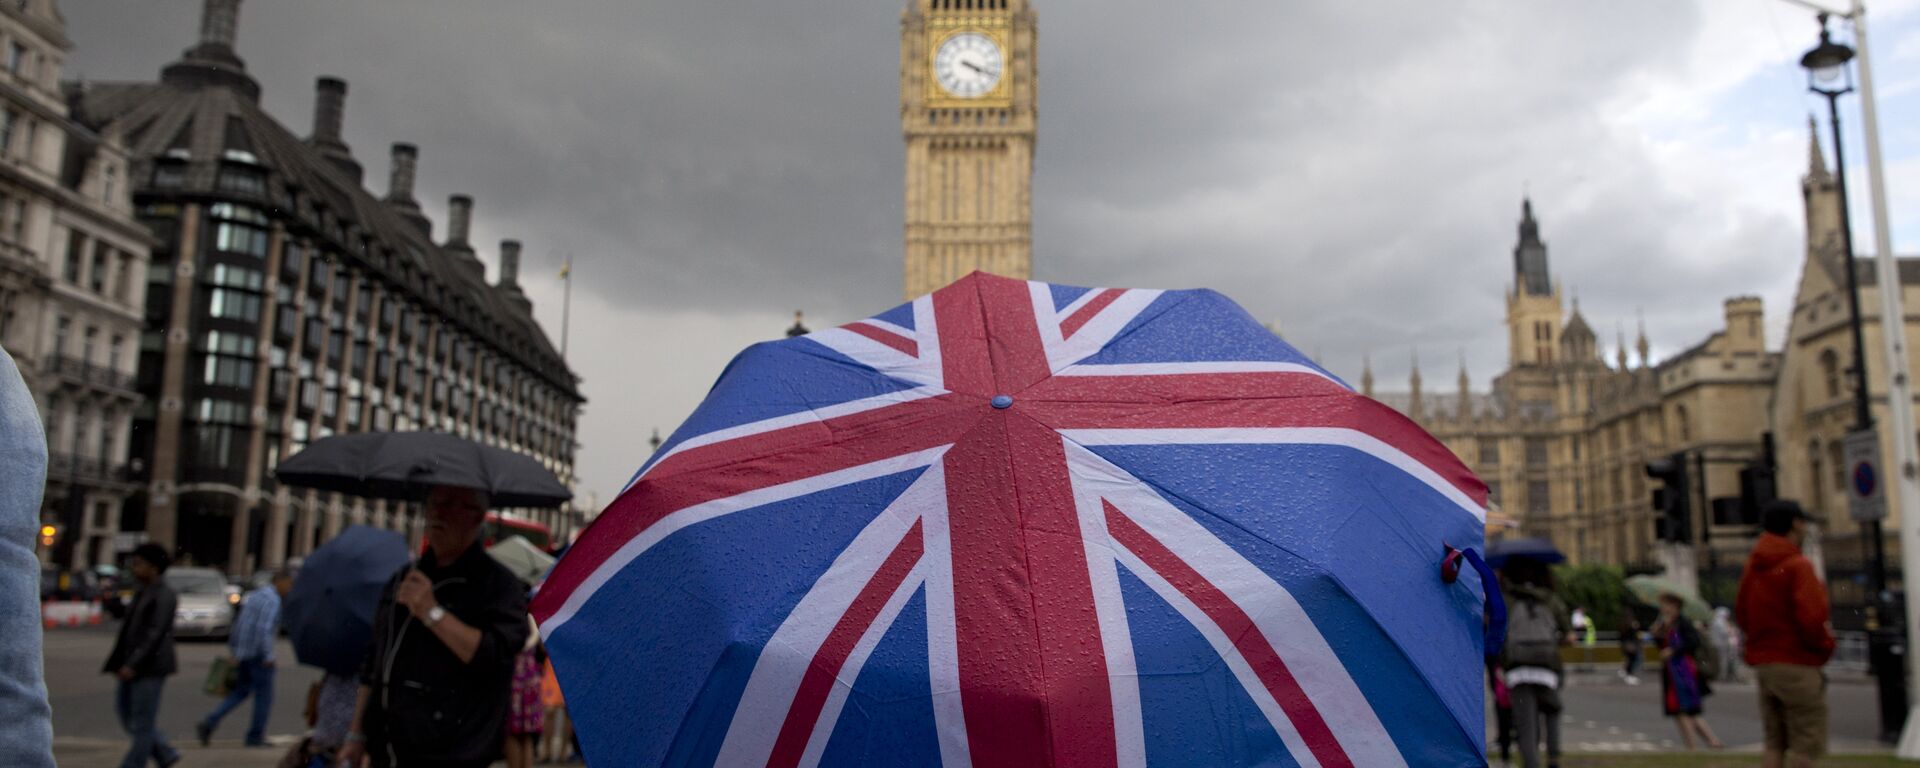 A pedestrian shelters from the rain beneath a Union flag themed umbrella as they walk near the Big Ben clock face and the Elizabeth Tower at the Houses of Parliament in central London on June 25, 2016. - Sputnik Việt Nam, 1920, 20.08.2022